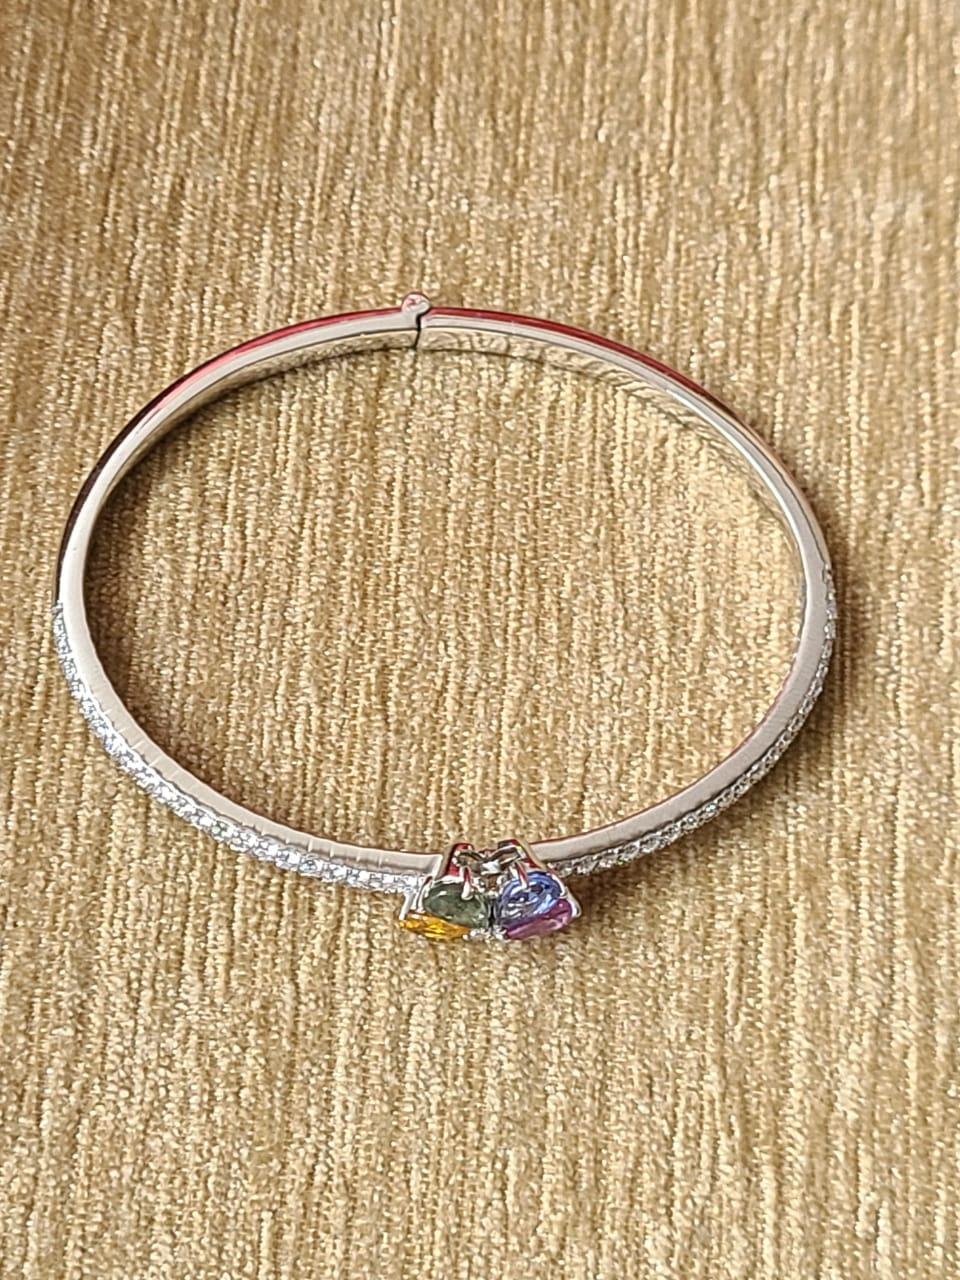 A very chic Multi Sapphire Modern/ Bangle Bracelet set in 18K White Gold & Diamonds. The weight of the Multi Sapphires is 2.37 carats. The Multi Sapphires are of Ceylon origin. The combined weight of the Diamonds is 1.57 carats. Net Gold weight is